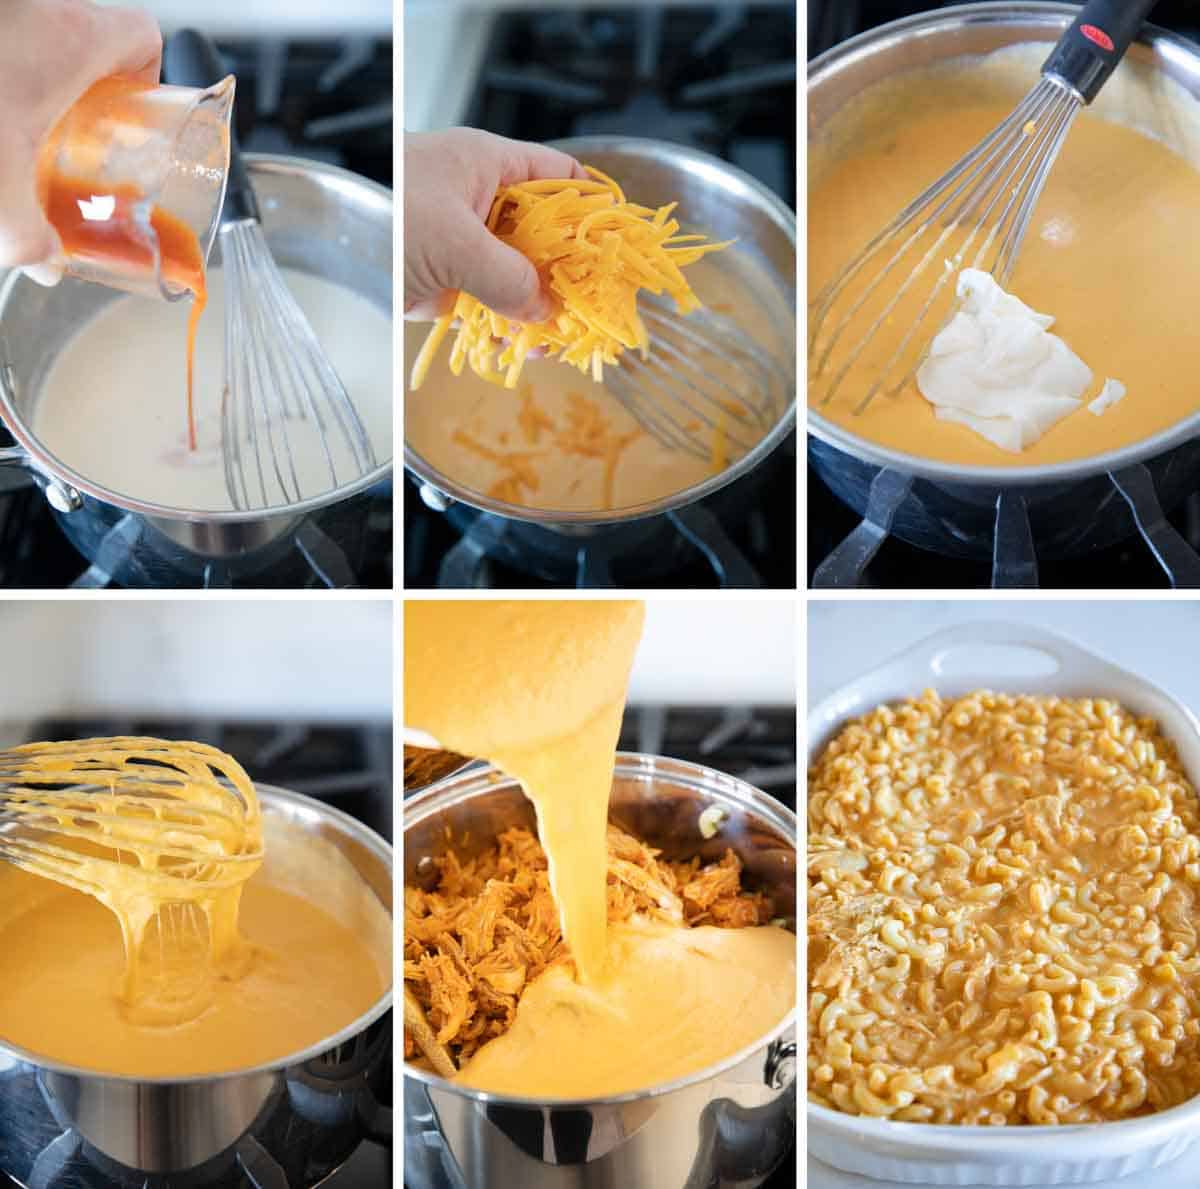 photos showing making of cheese sauce and stirring ingredients together